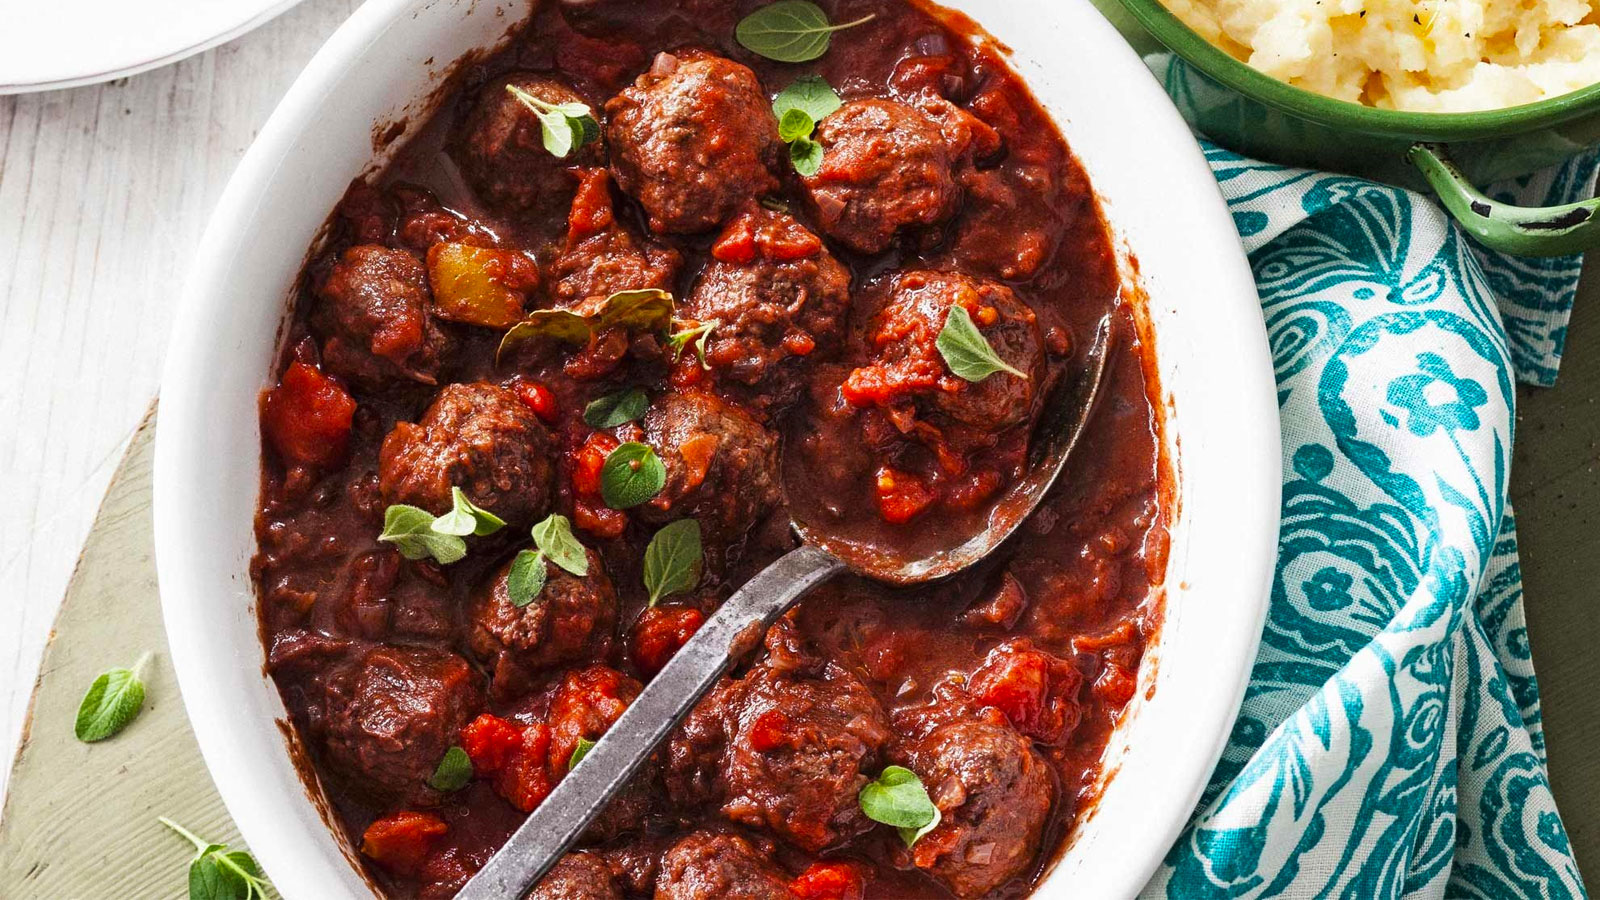 Eat at an Endless Buffet and We’ll Guess Your Age and Gender 47 lamb meatballs